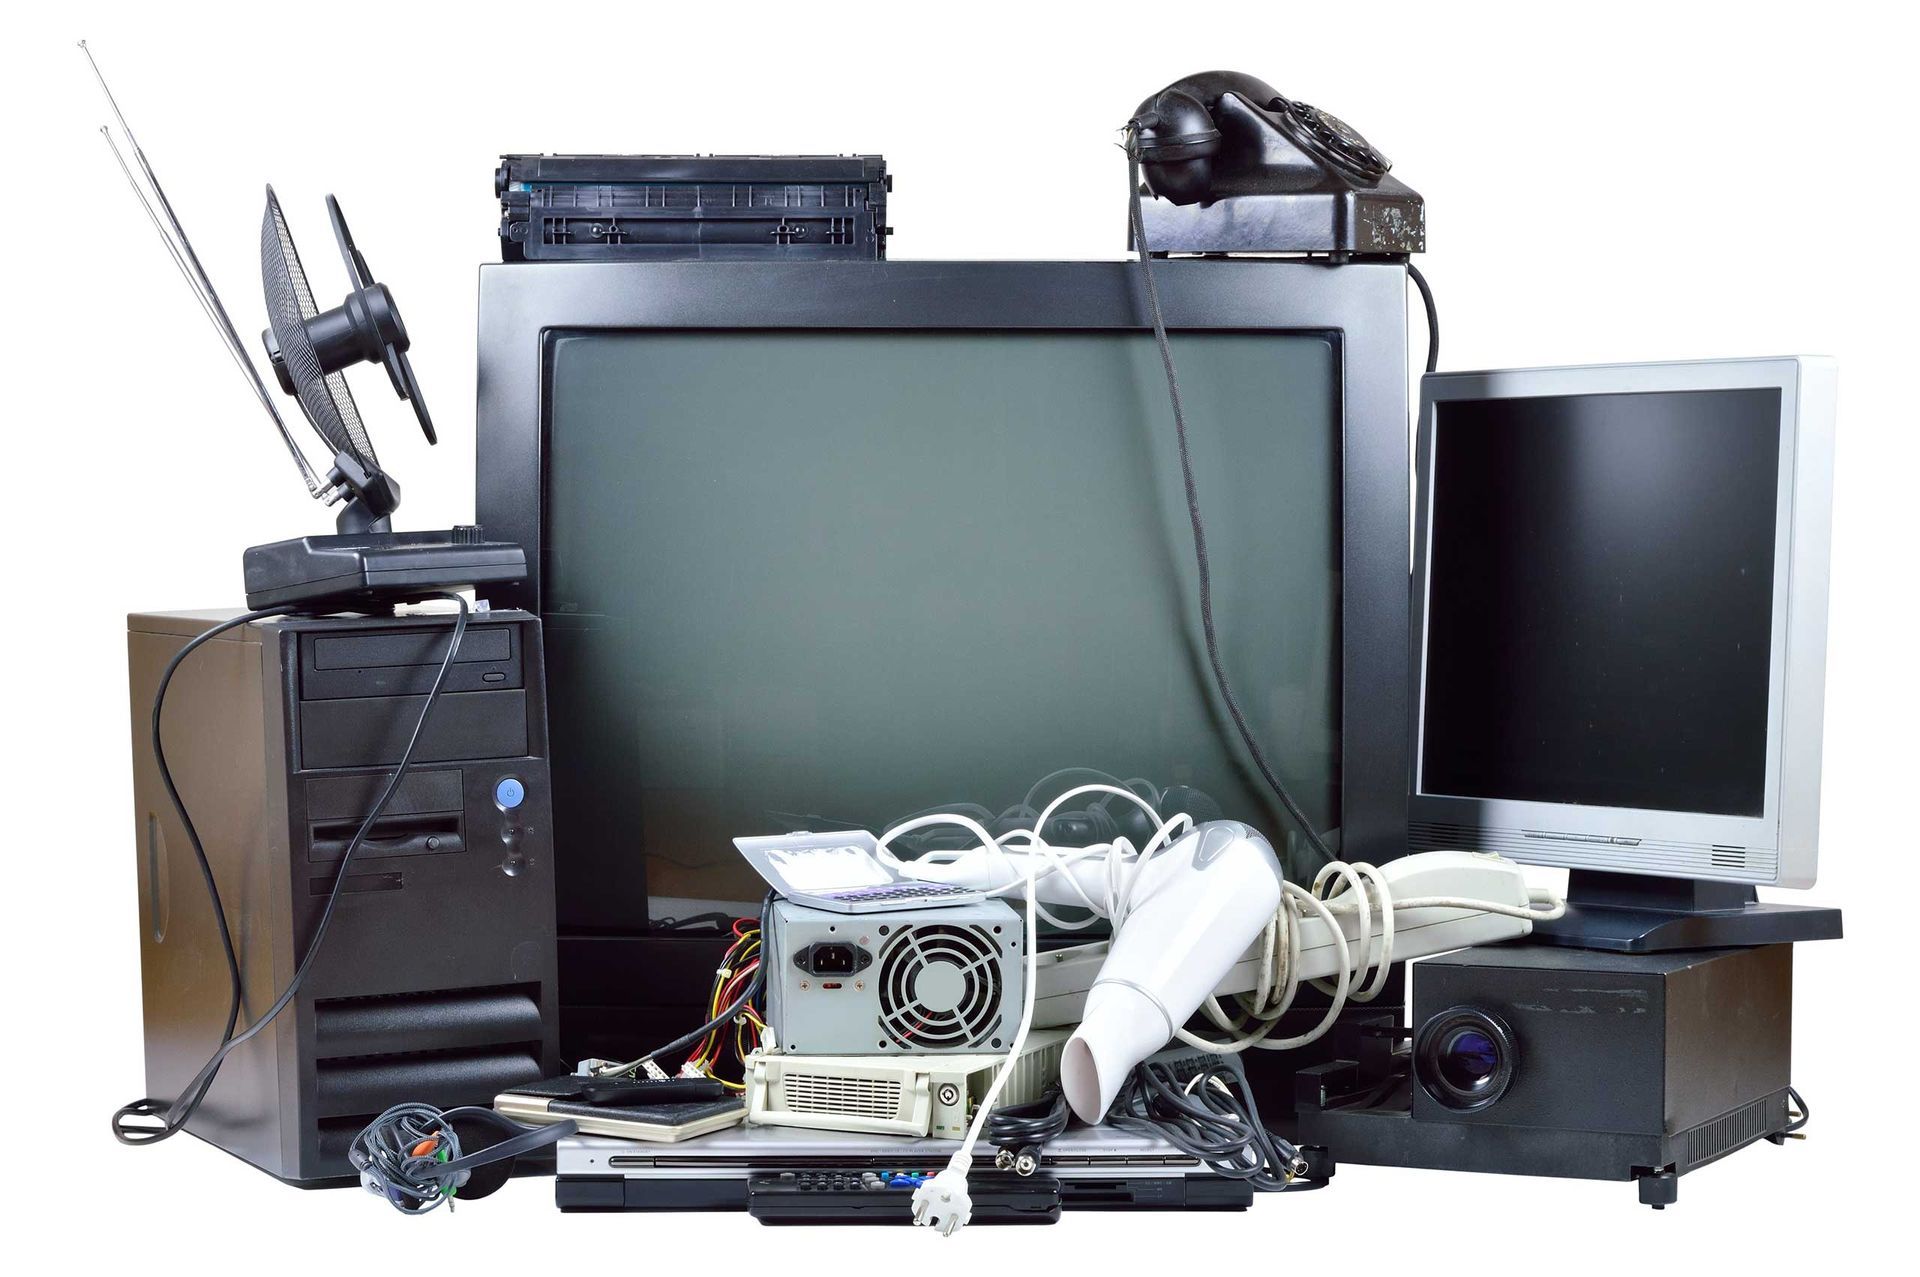 computer and electronics appliances